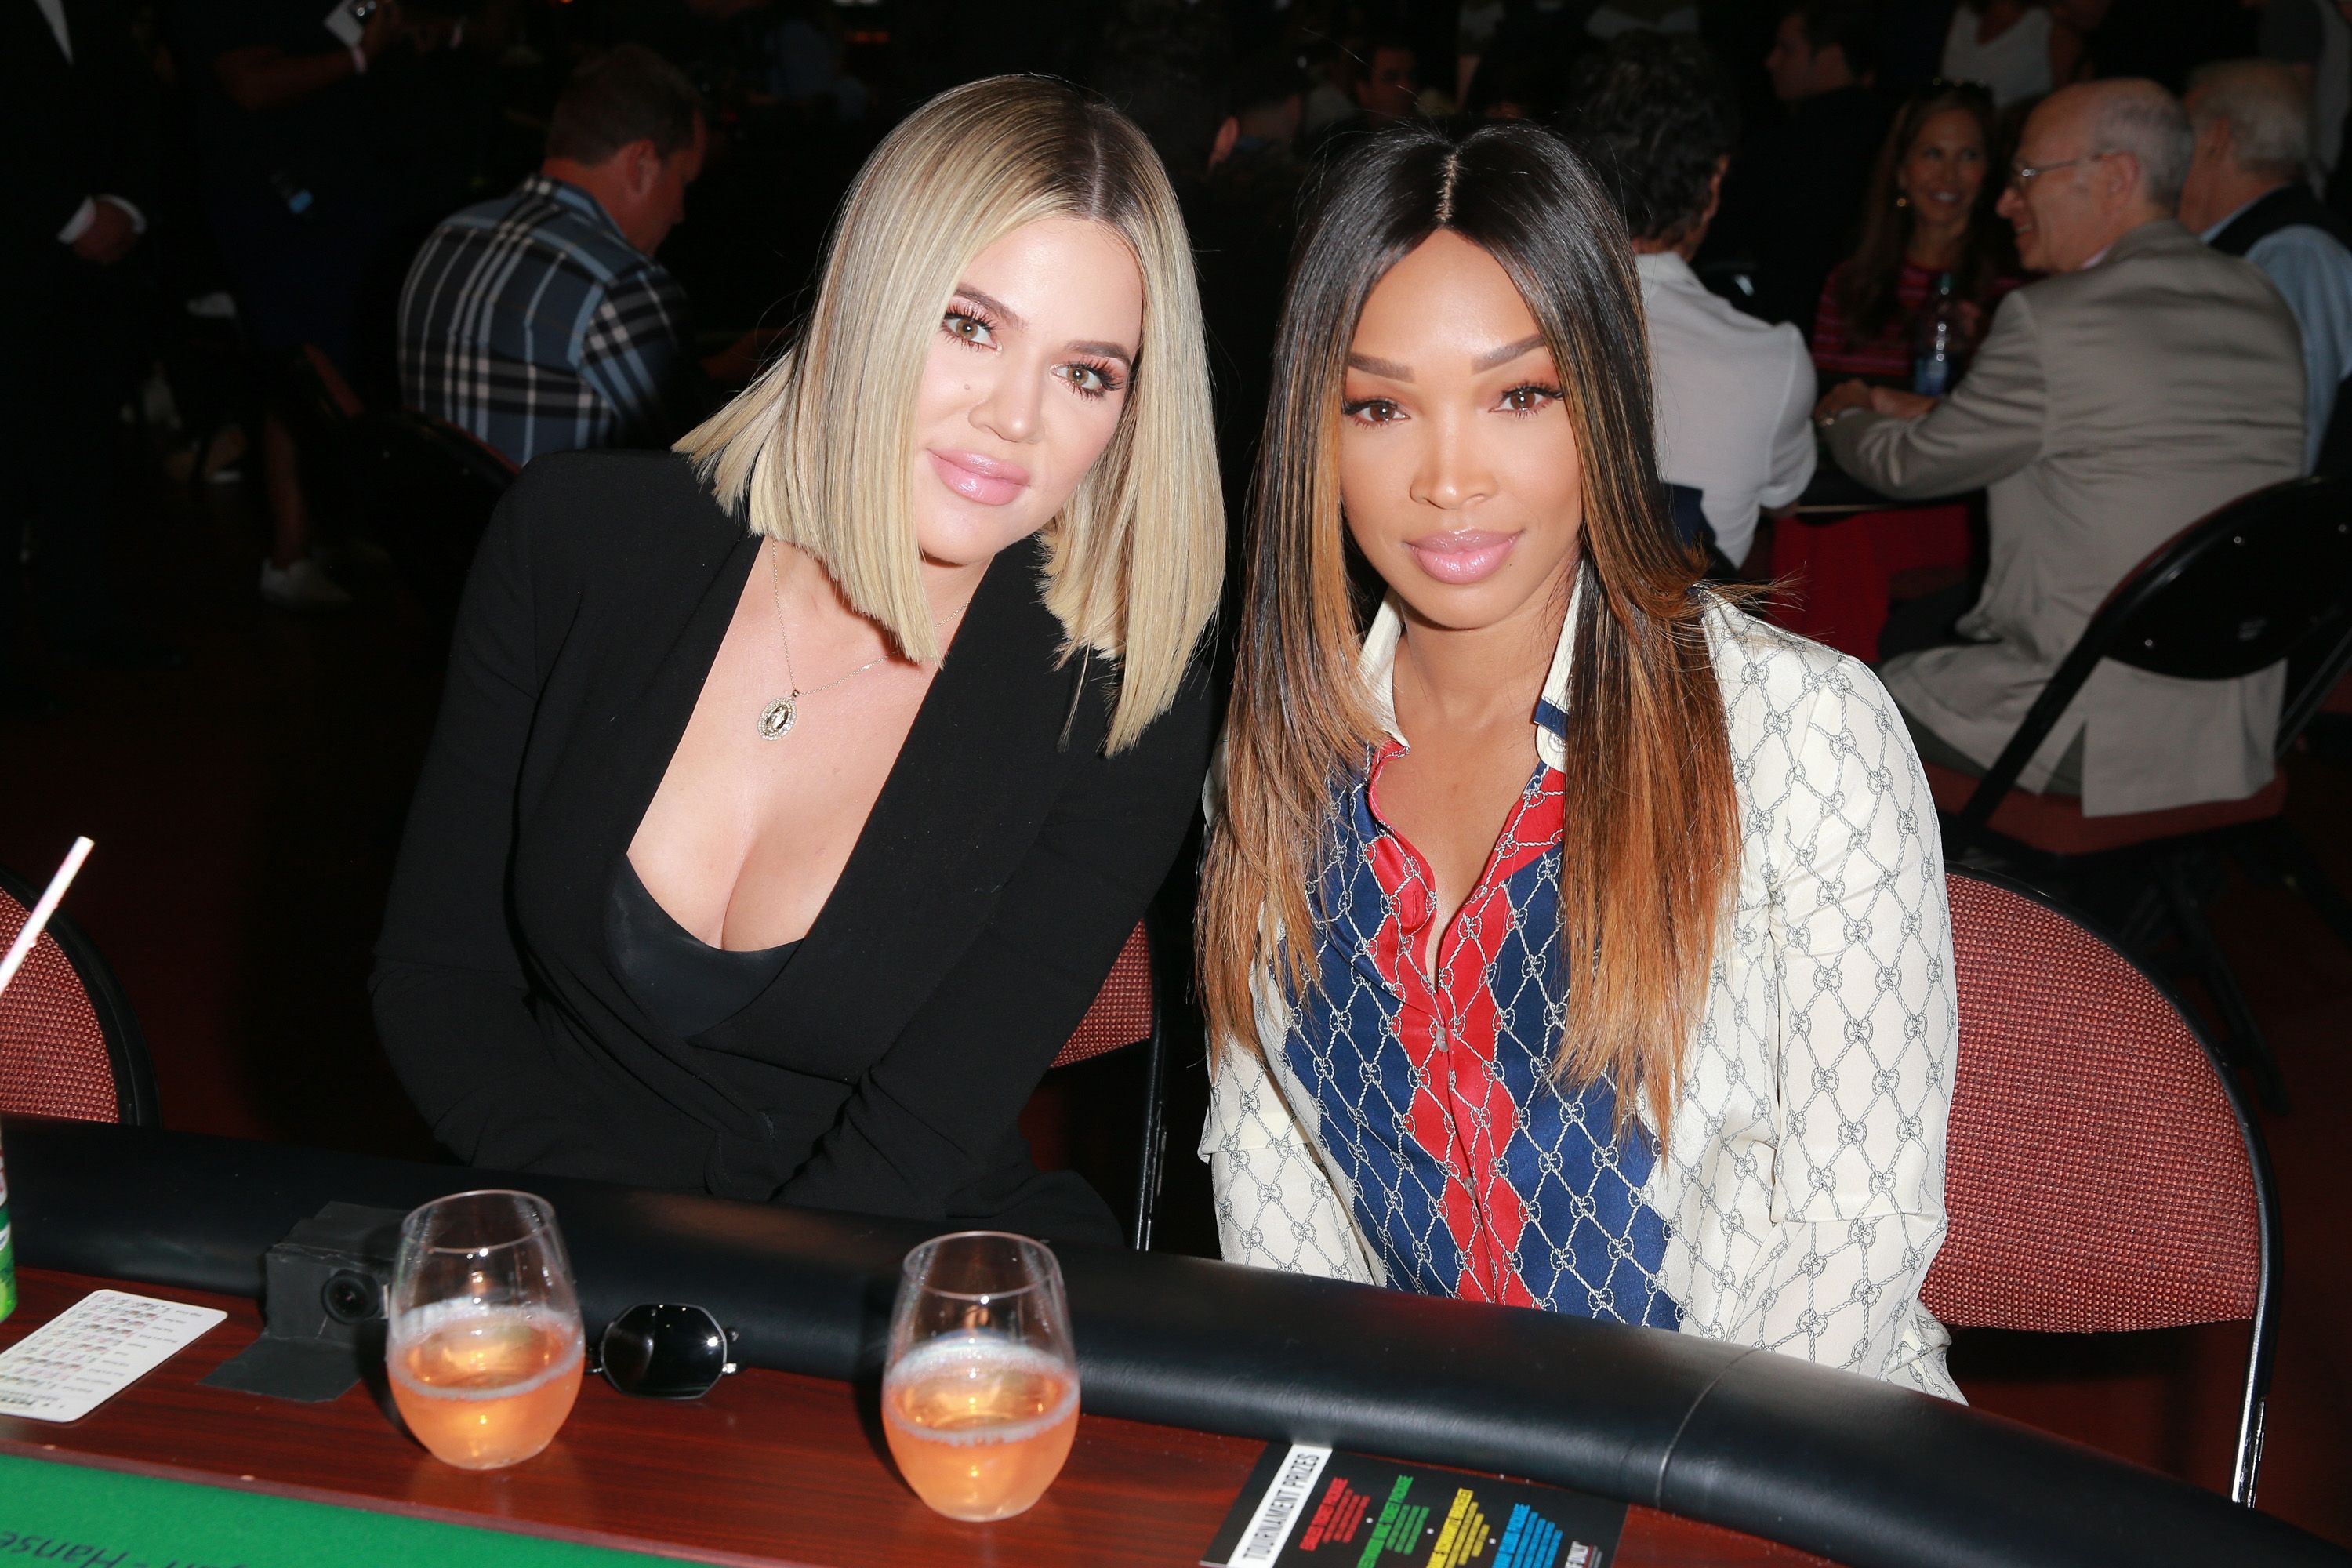 Khloe Kardashian & Malika Haqq at the first annual "If Only" Texas hold'em charity poker tournament on July 29, 2018 in California. | Photo: Getty Images